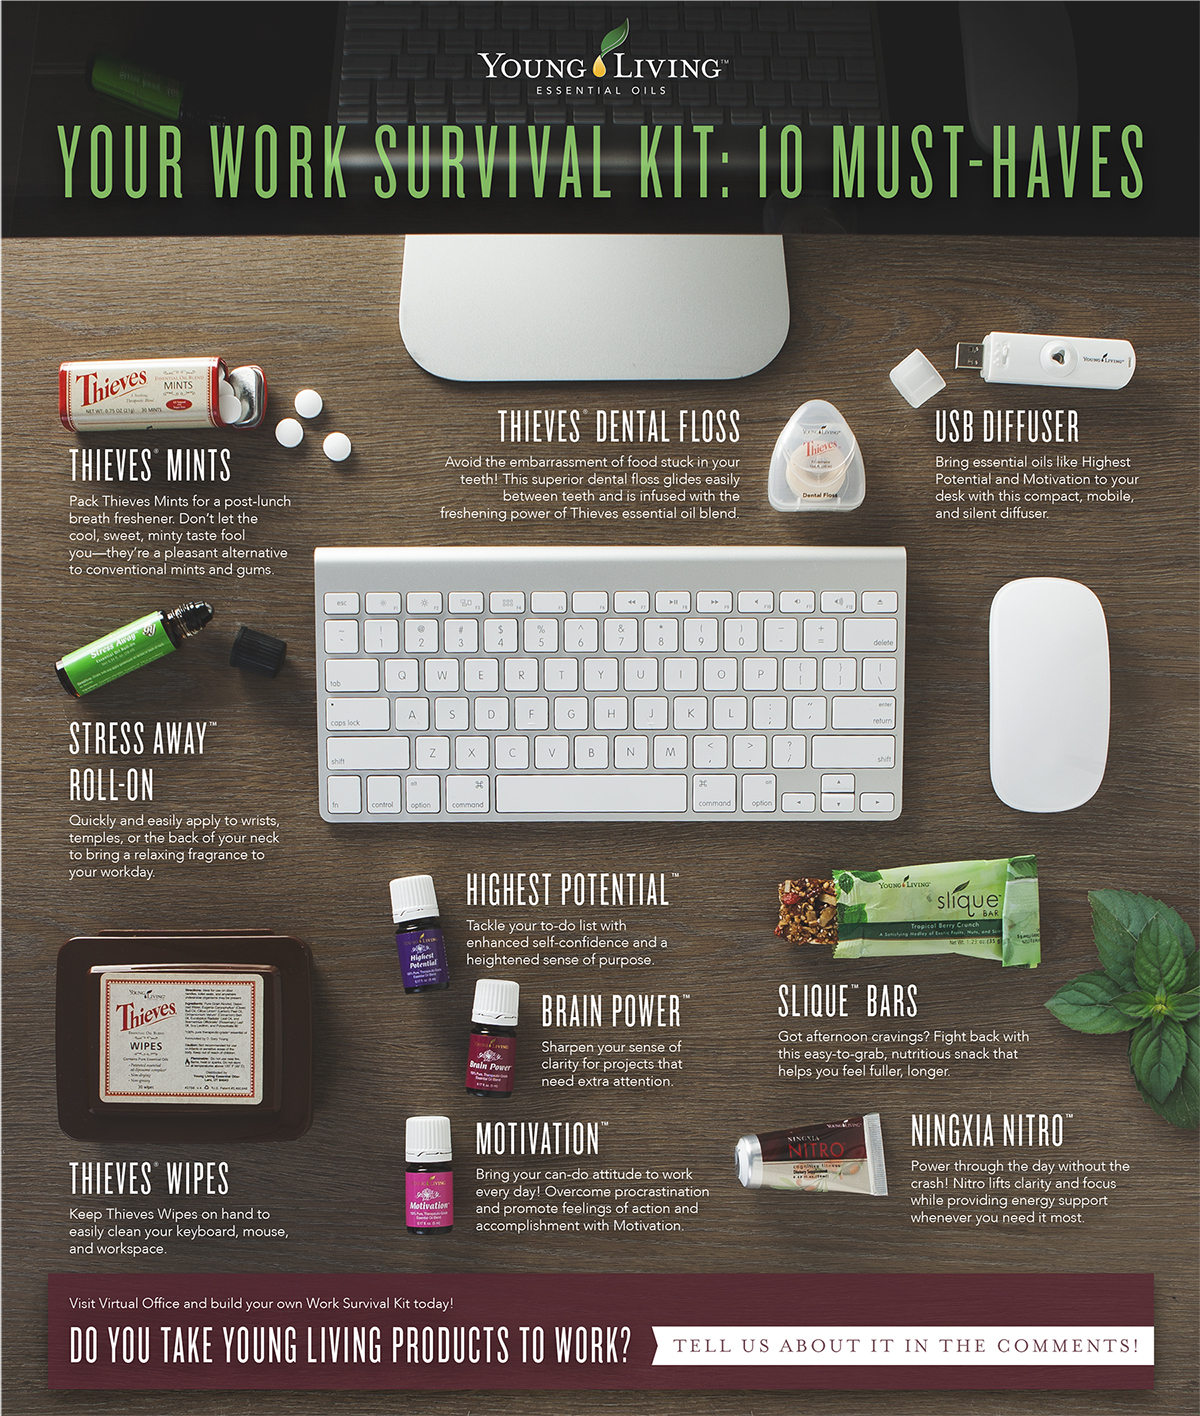 Young Living Essential Oils - Work survival kit - Thieves Mints, Stress Away Roll-On, Thieves Wipes, Highest Potential, Brain Power, Motivation, Slique Bars, NingXia Nitro, Thieves Dental Floss, USB Diffuser